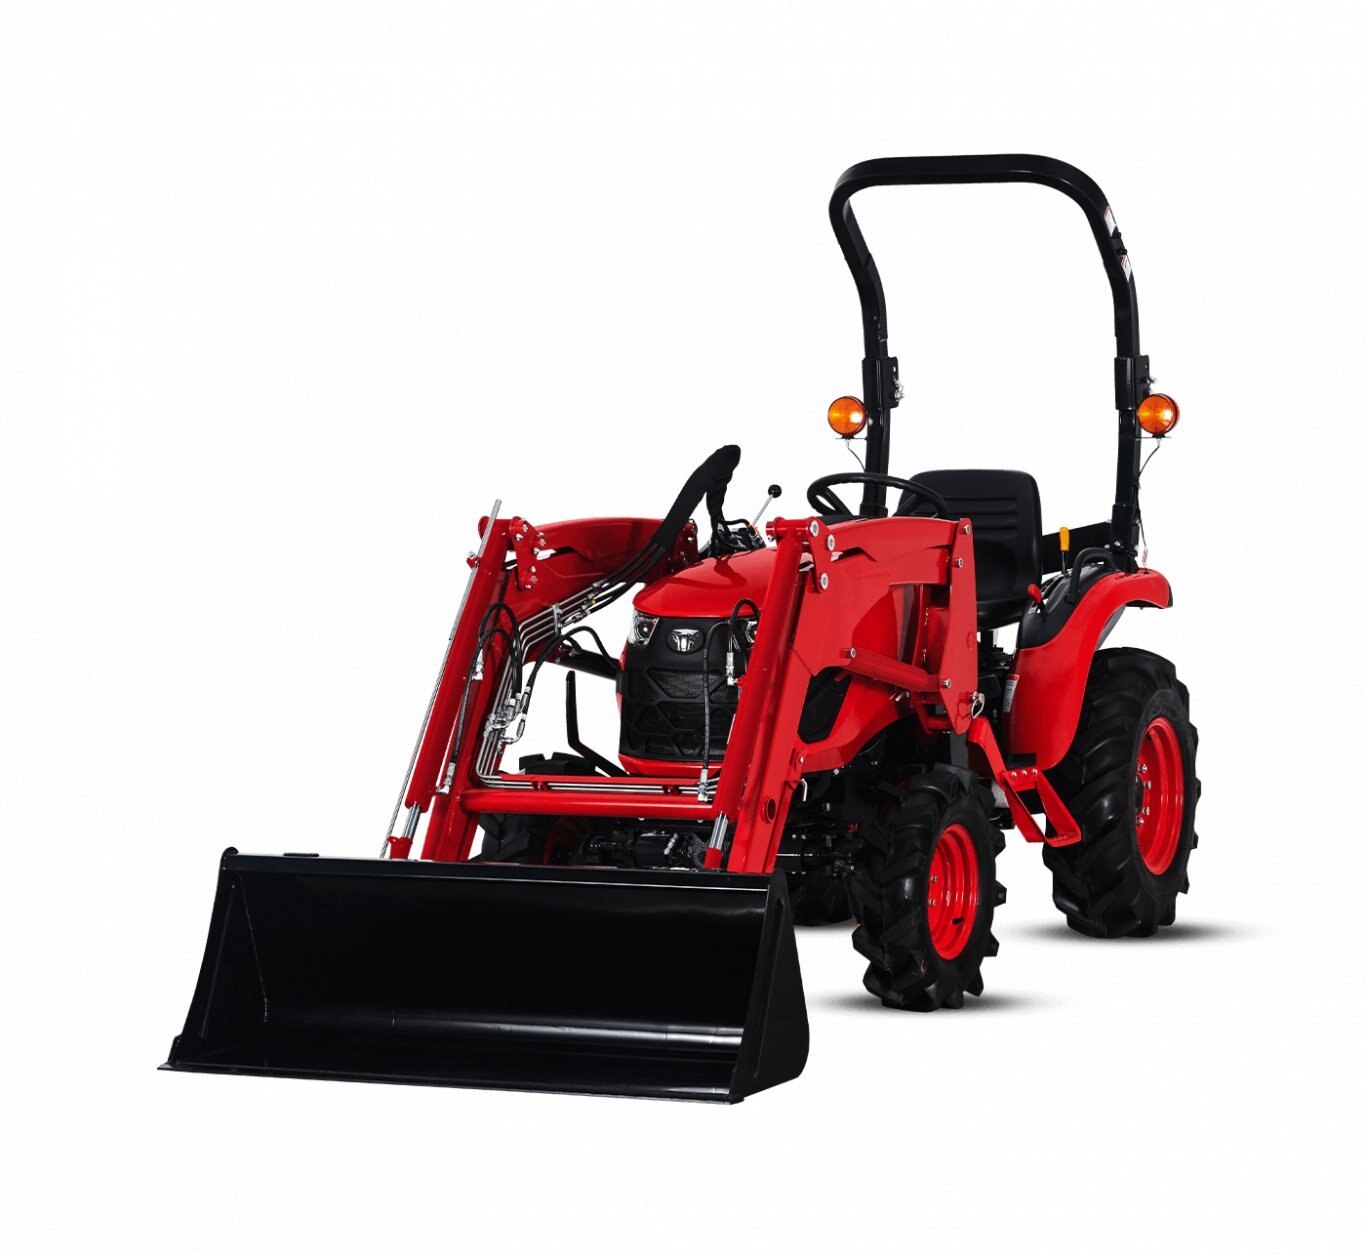 TYM Tractors Series 1 Sub Compact 2610